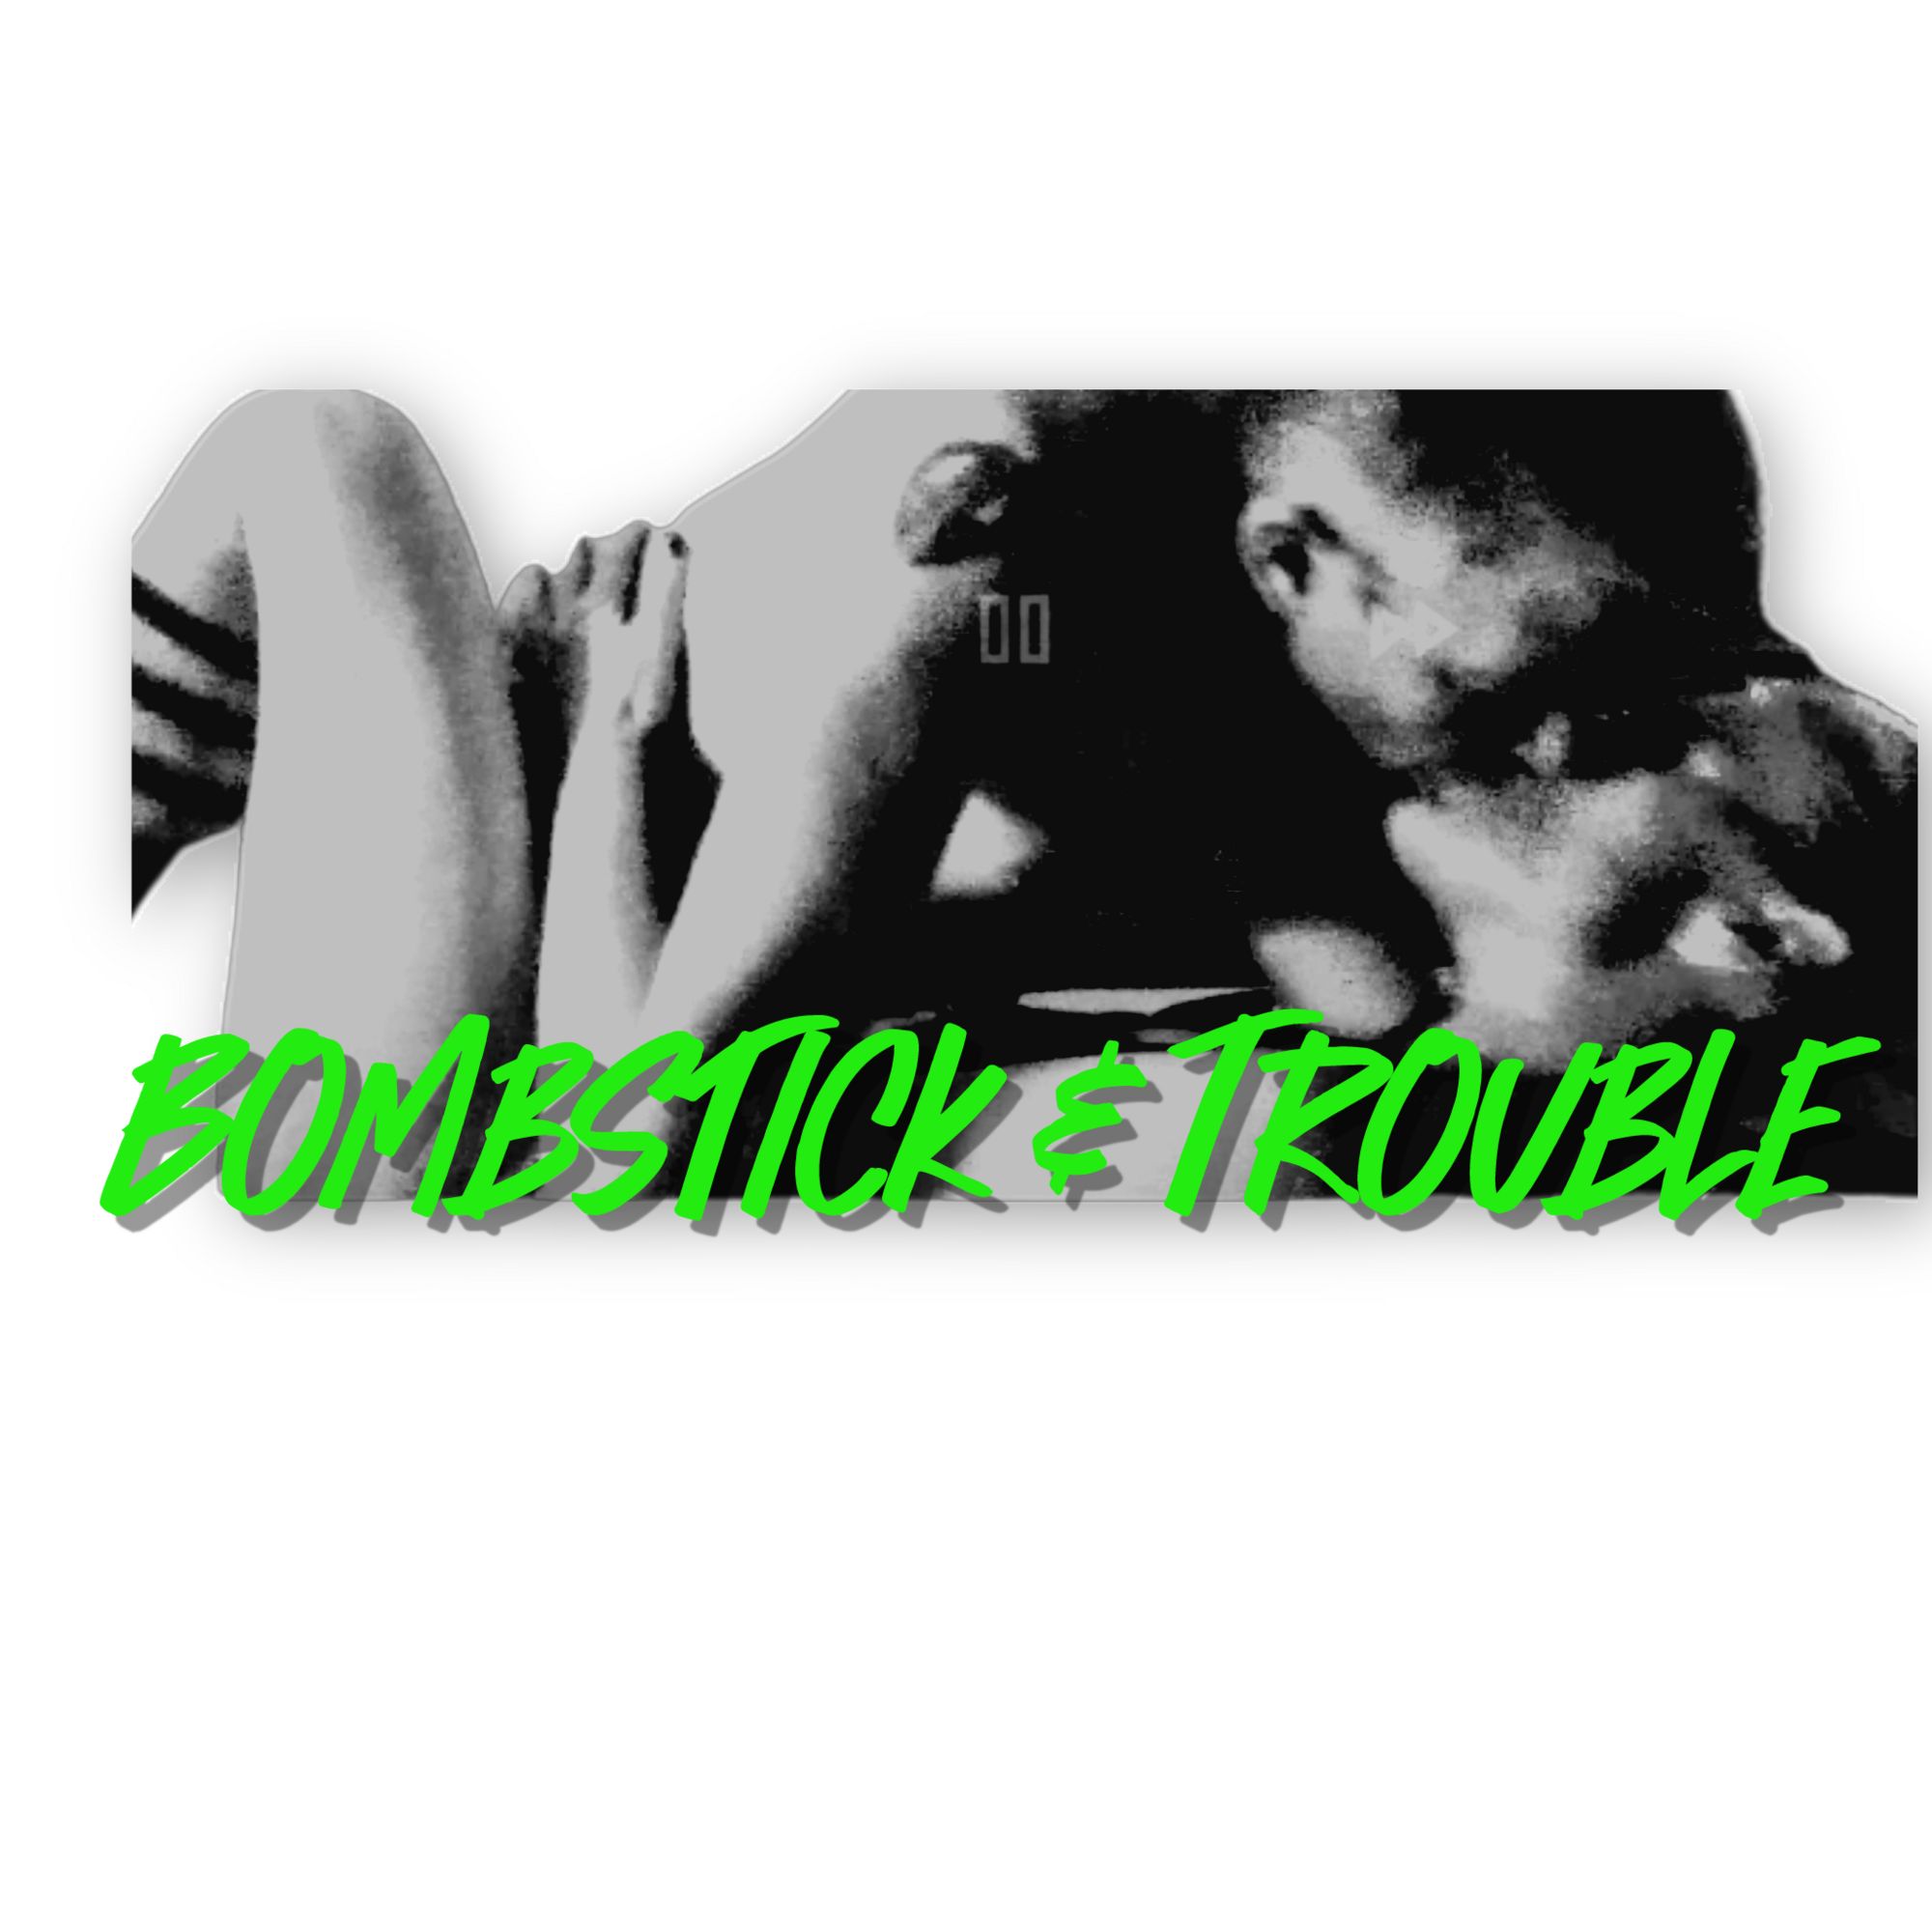 Bombstick and Trouble  #2